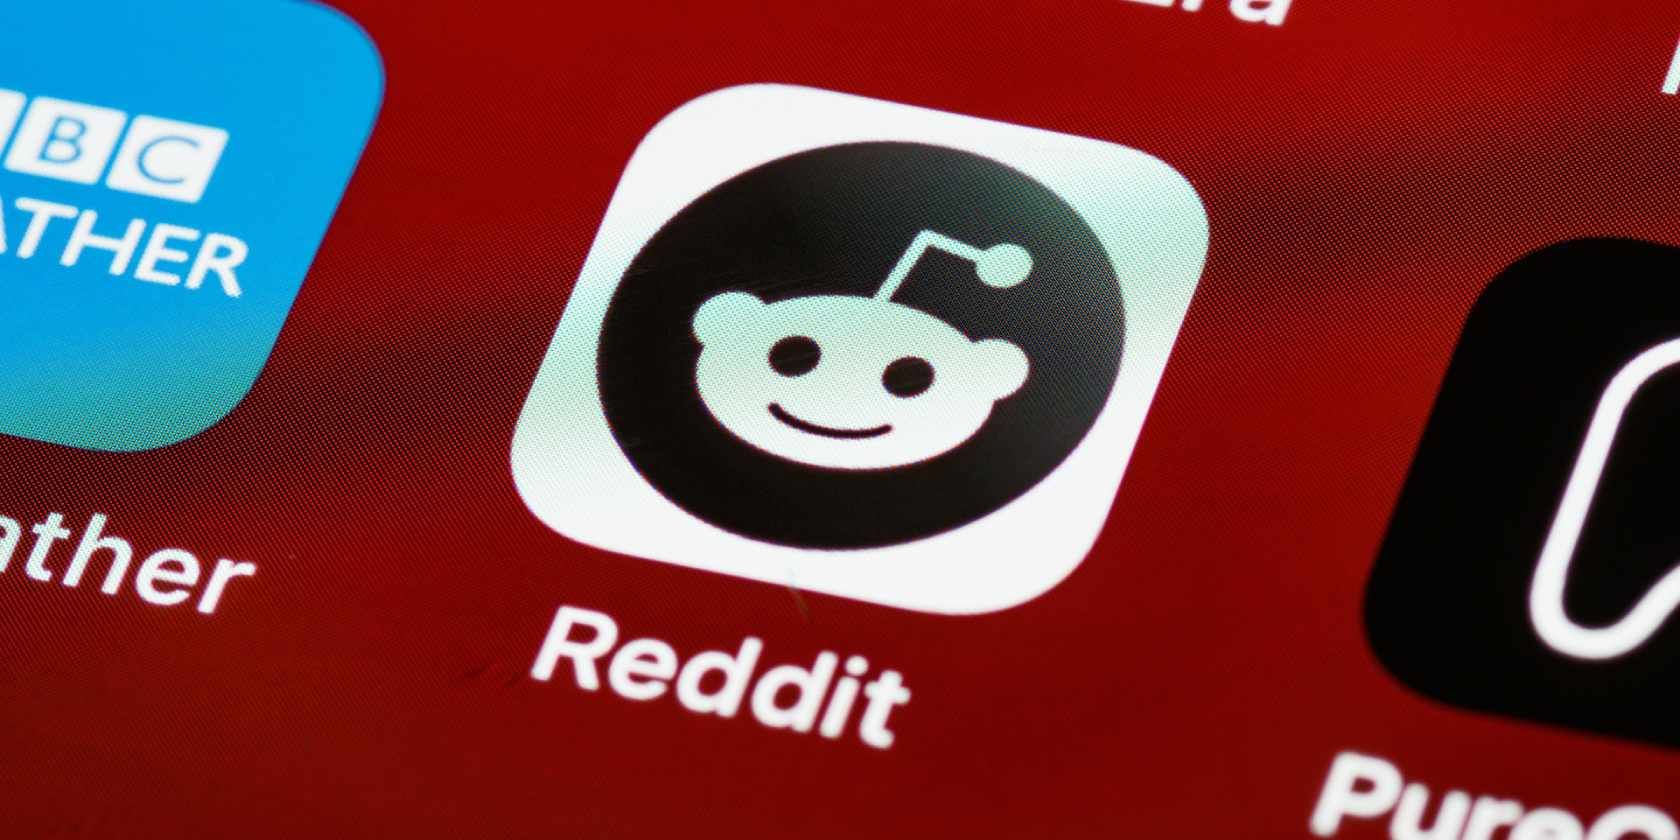 Reddit icon in a red, white, and black labeled box